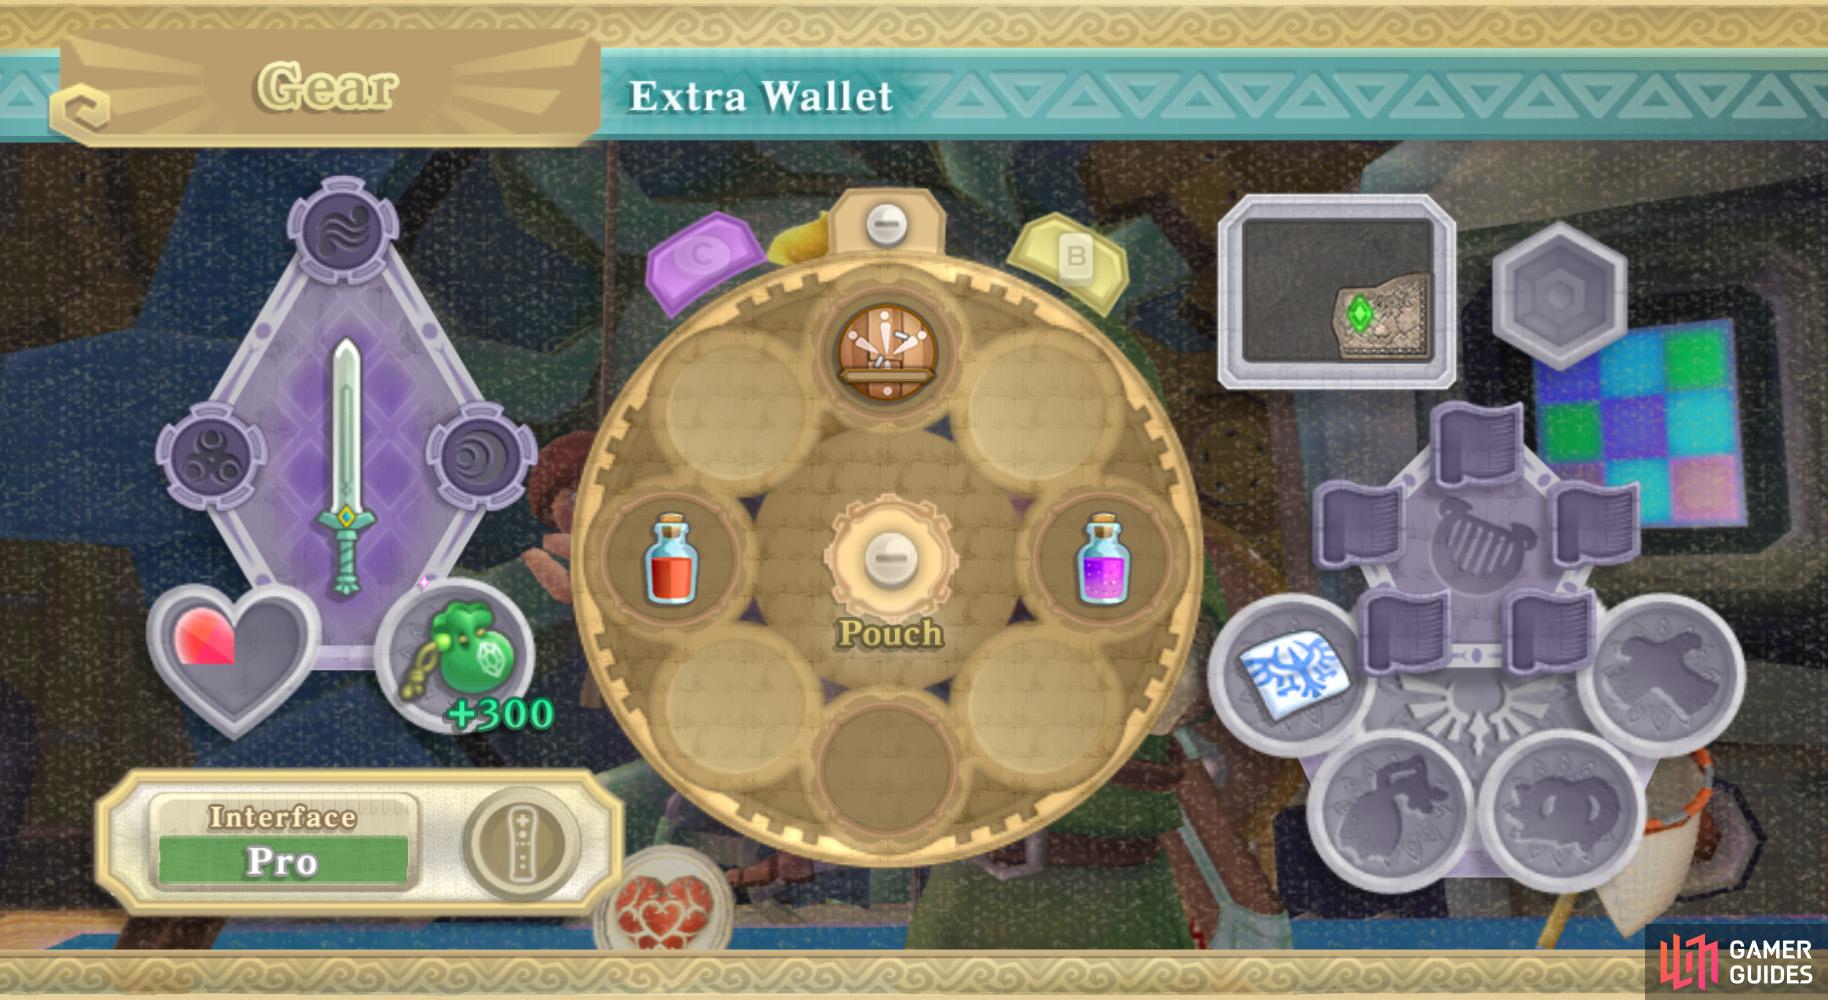 The extra Rupees you can carry is indicated by +300 near your wallet icon.